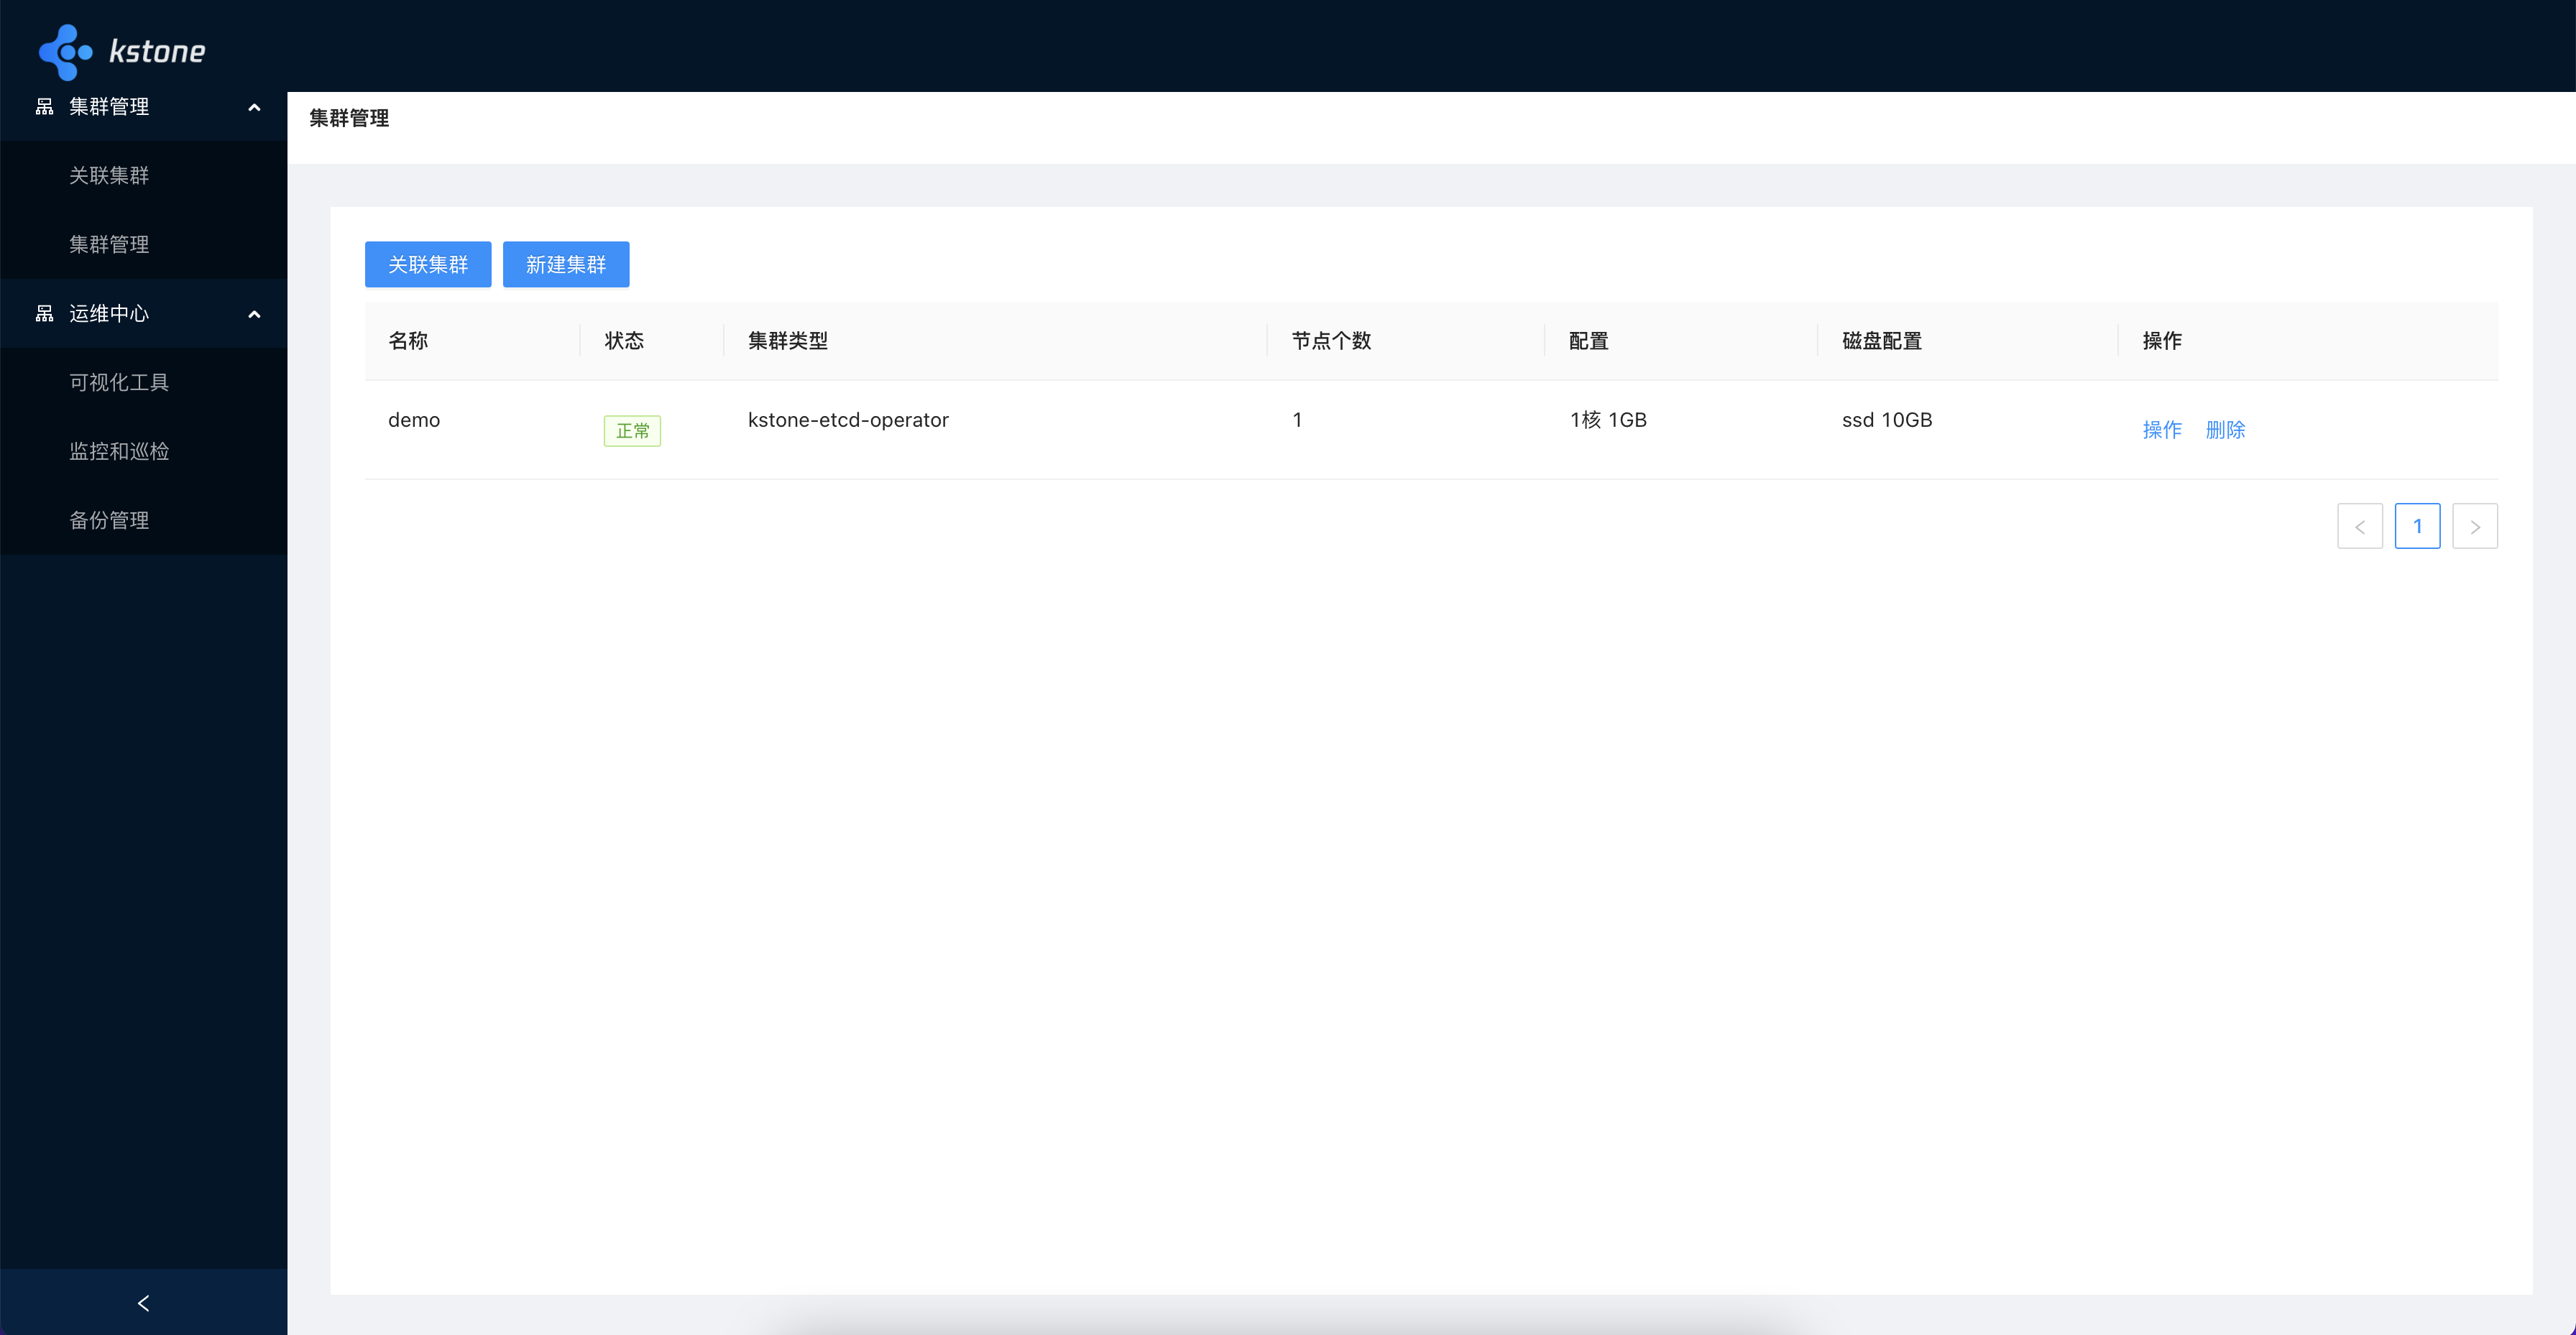 Dashboard UI cluster page